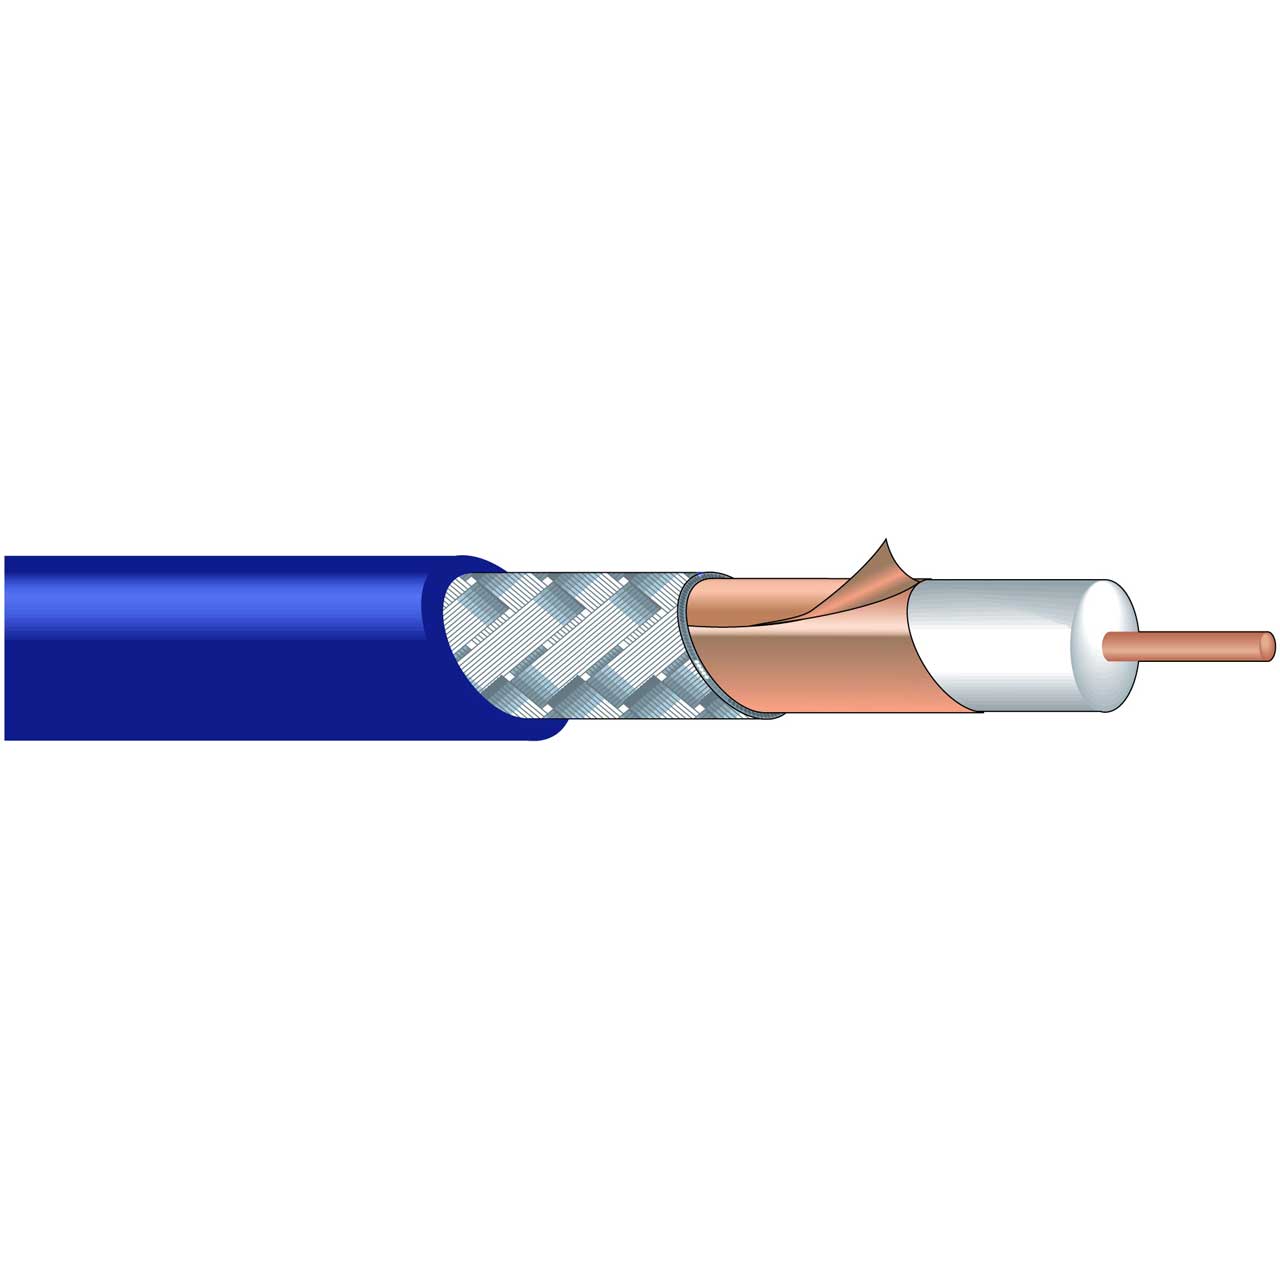 Canare L-3.3CUHD-984-BE 75 Ohm Coaxial Cable for 12G-SDI - Blue - 984 Foot  L-3.3CUHD-984 (BLUE)